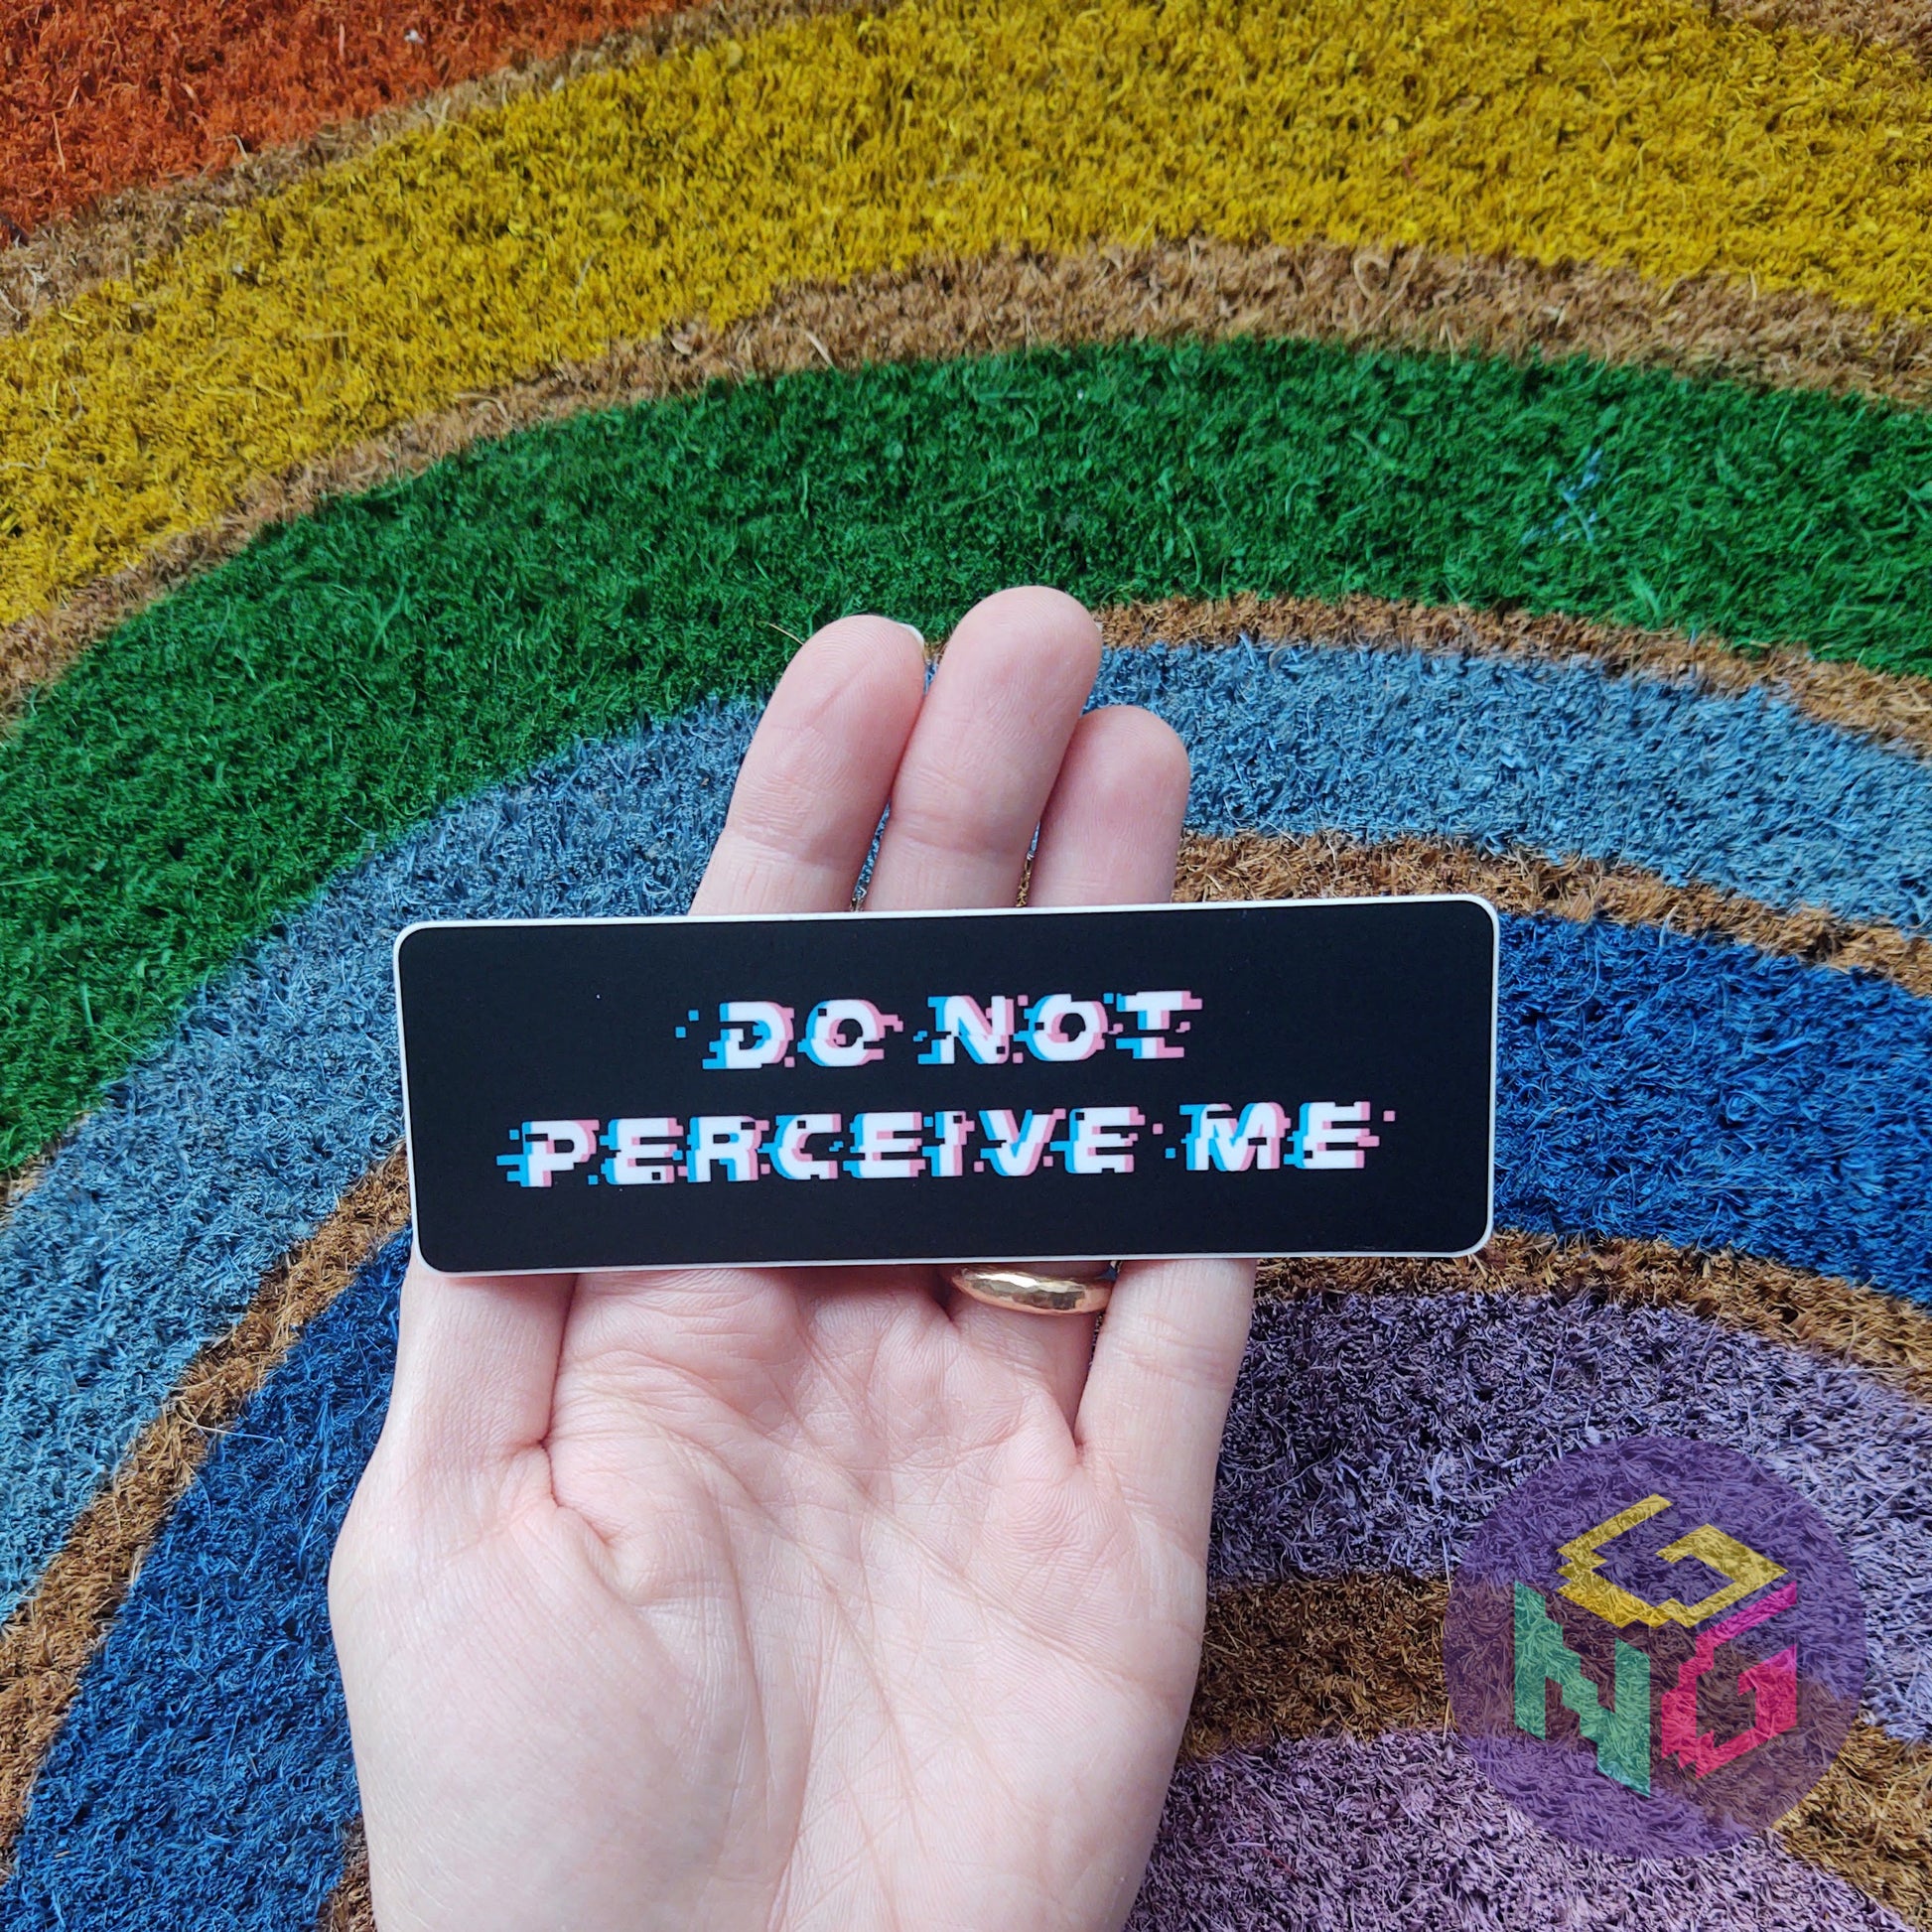 do not perceive me sticker held in a hand in front of rainbow welcome mat